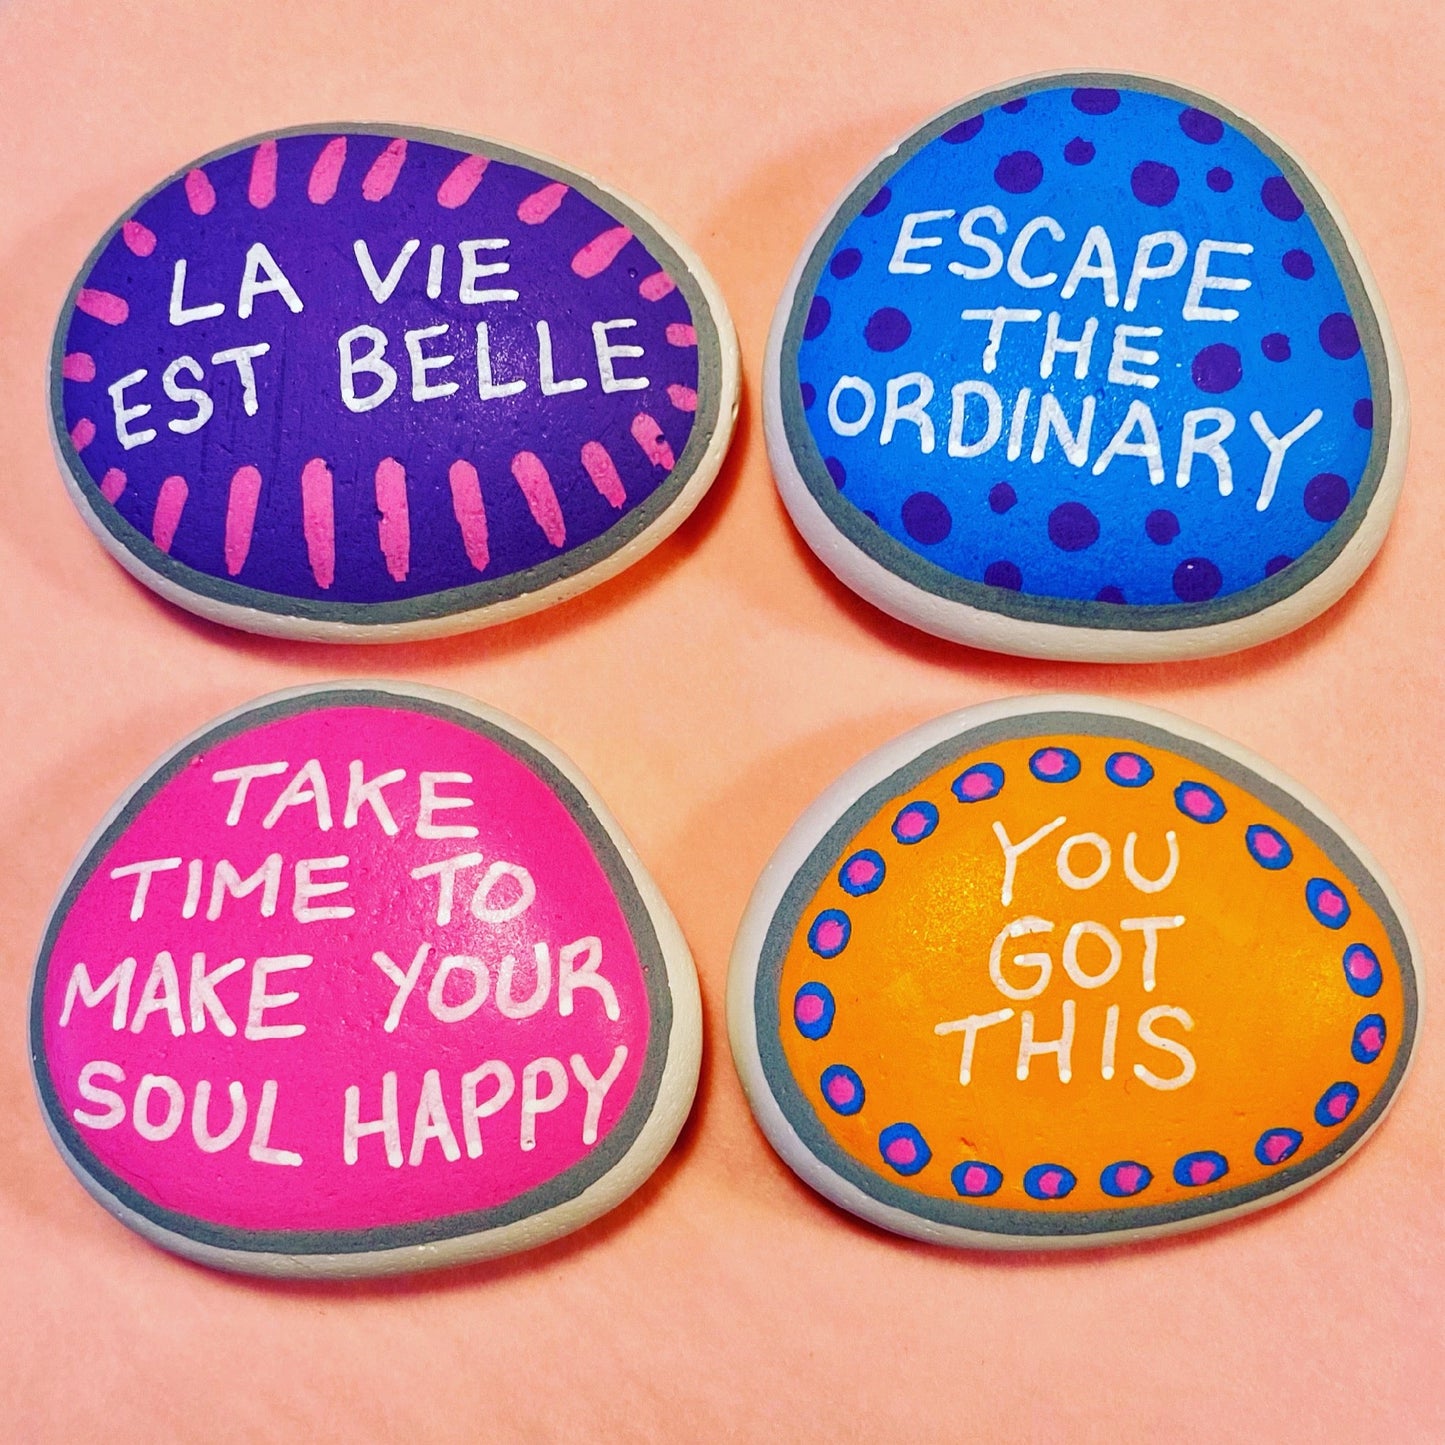 Colourful Hand painted pebbles with uplifting affirmations written on